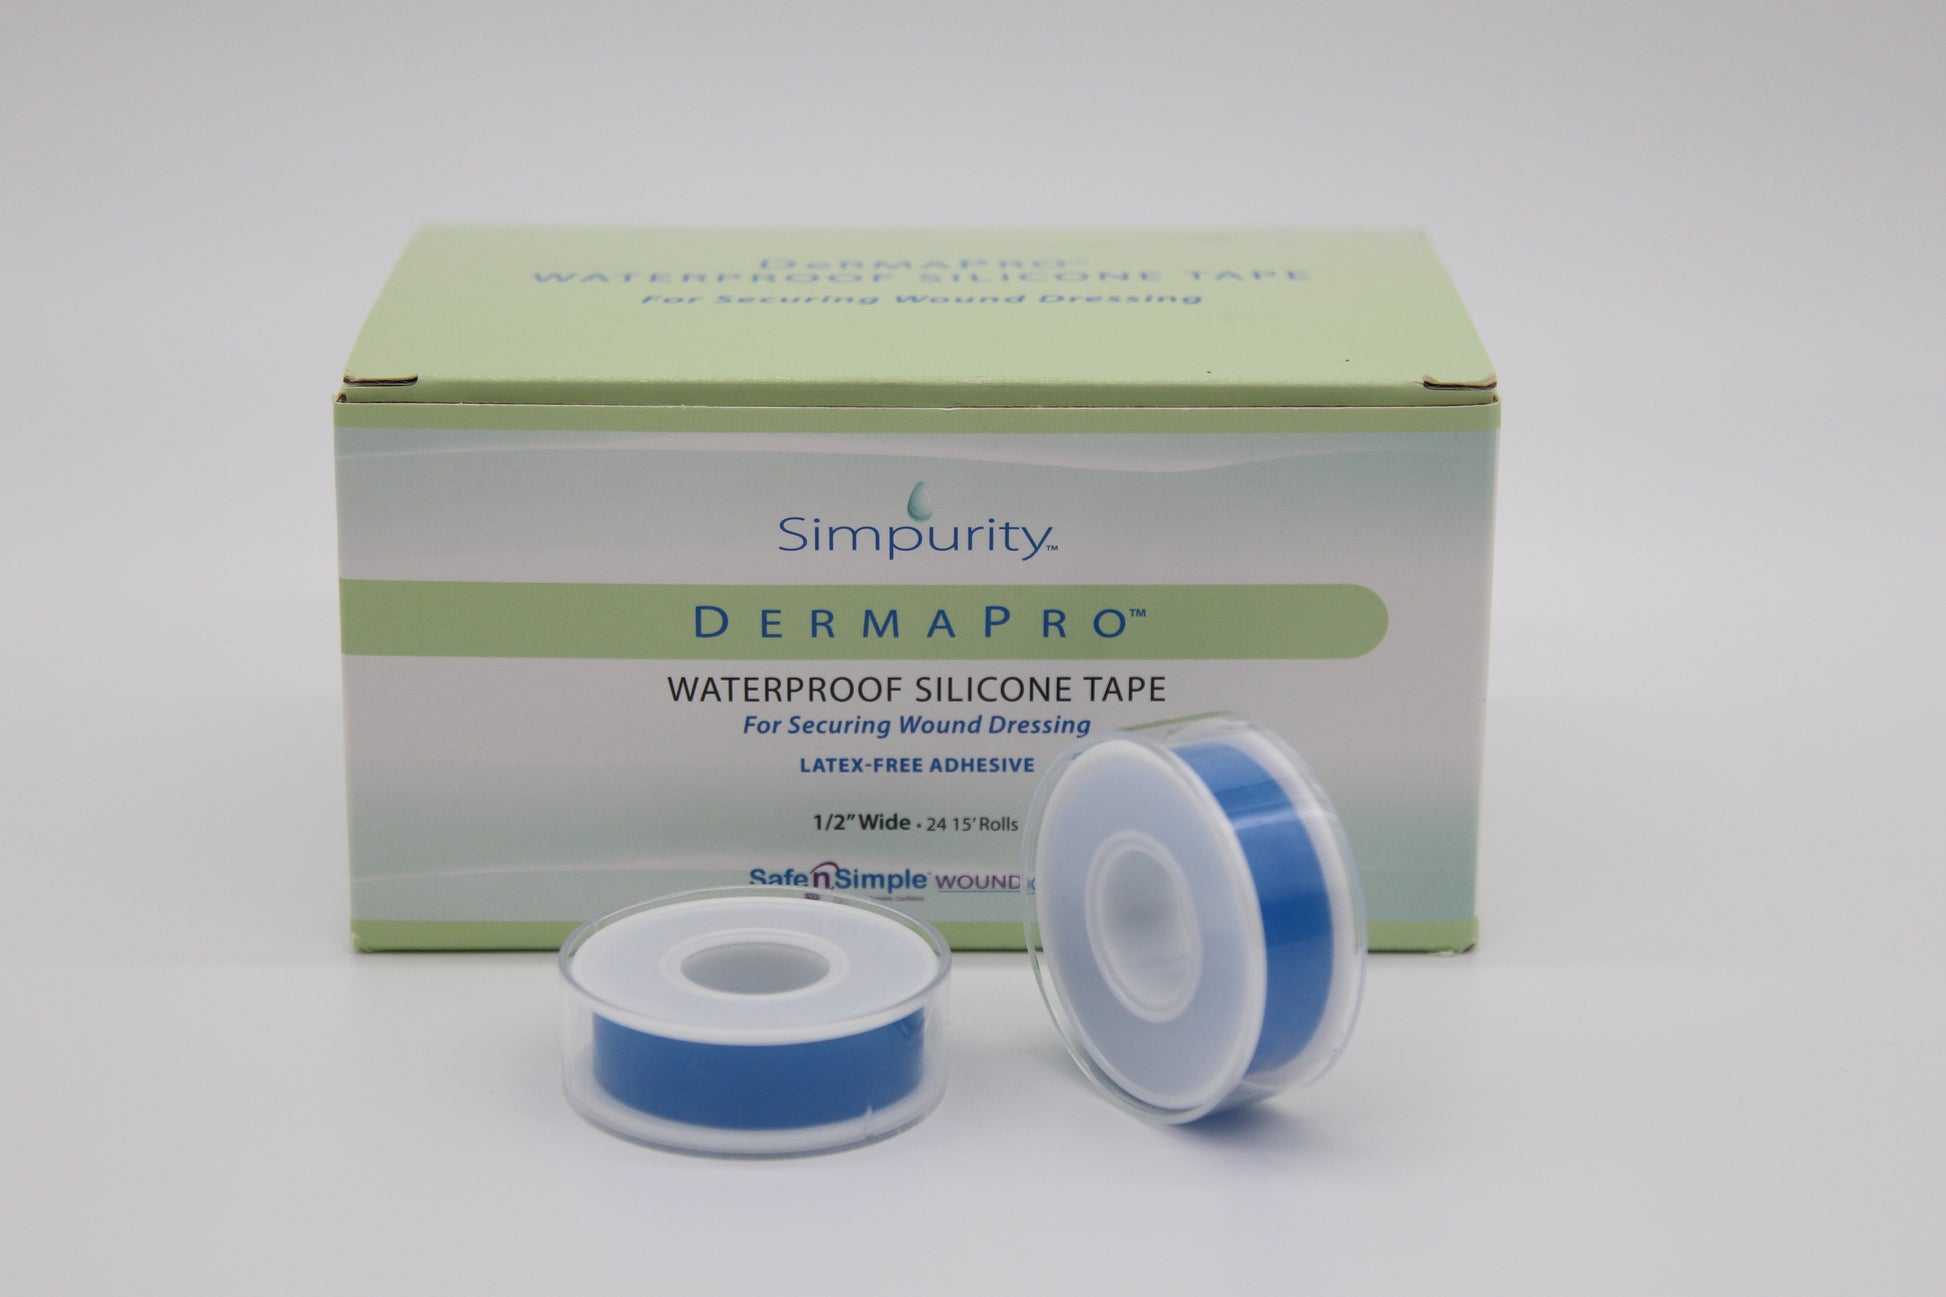 DermaPro Waterproof Silicone Tape, medical products